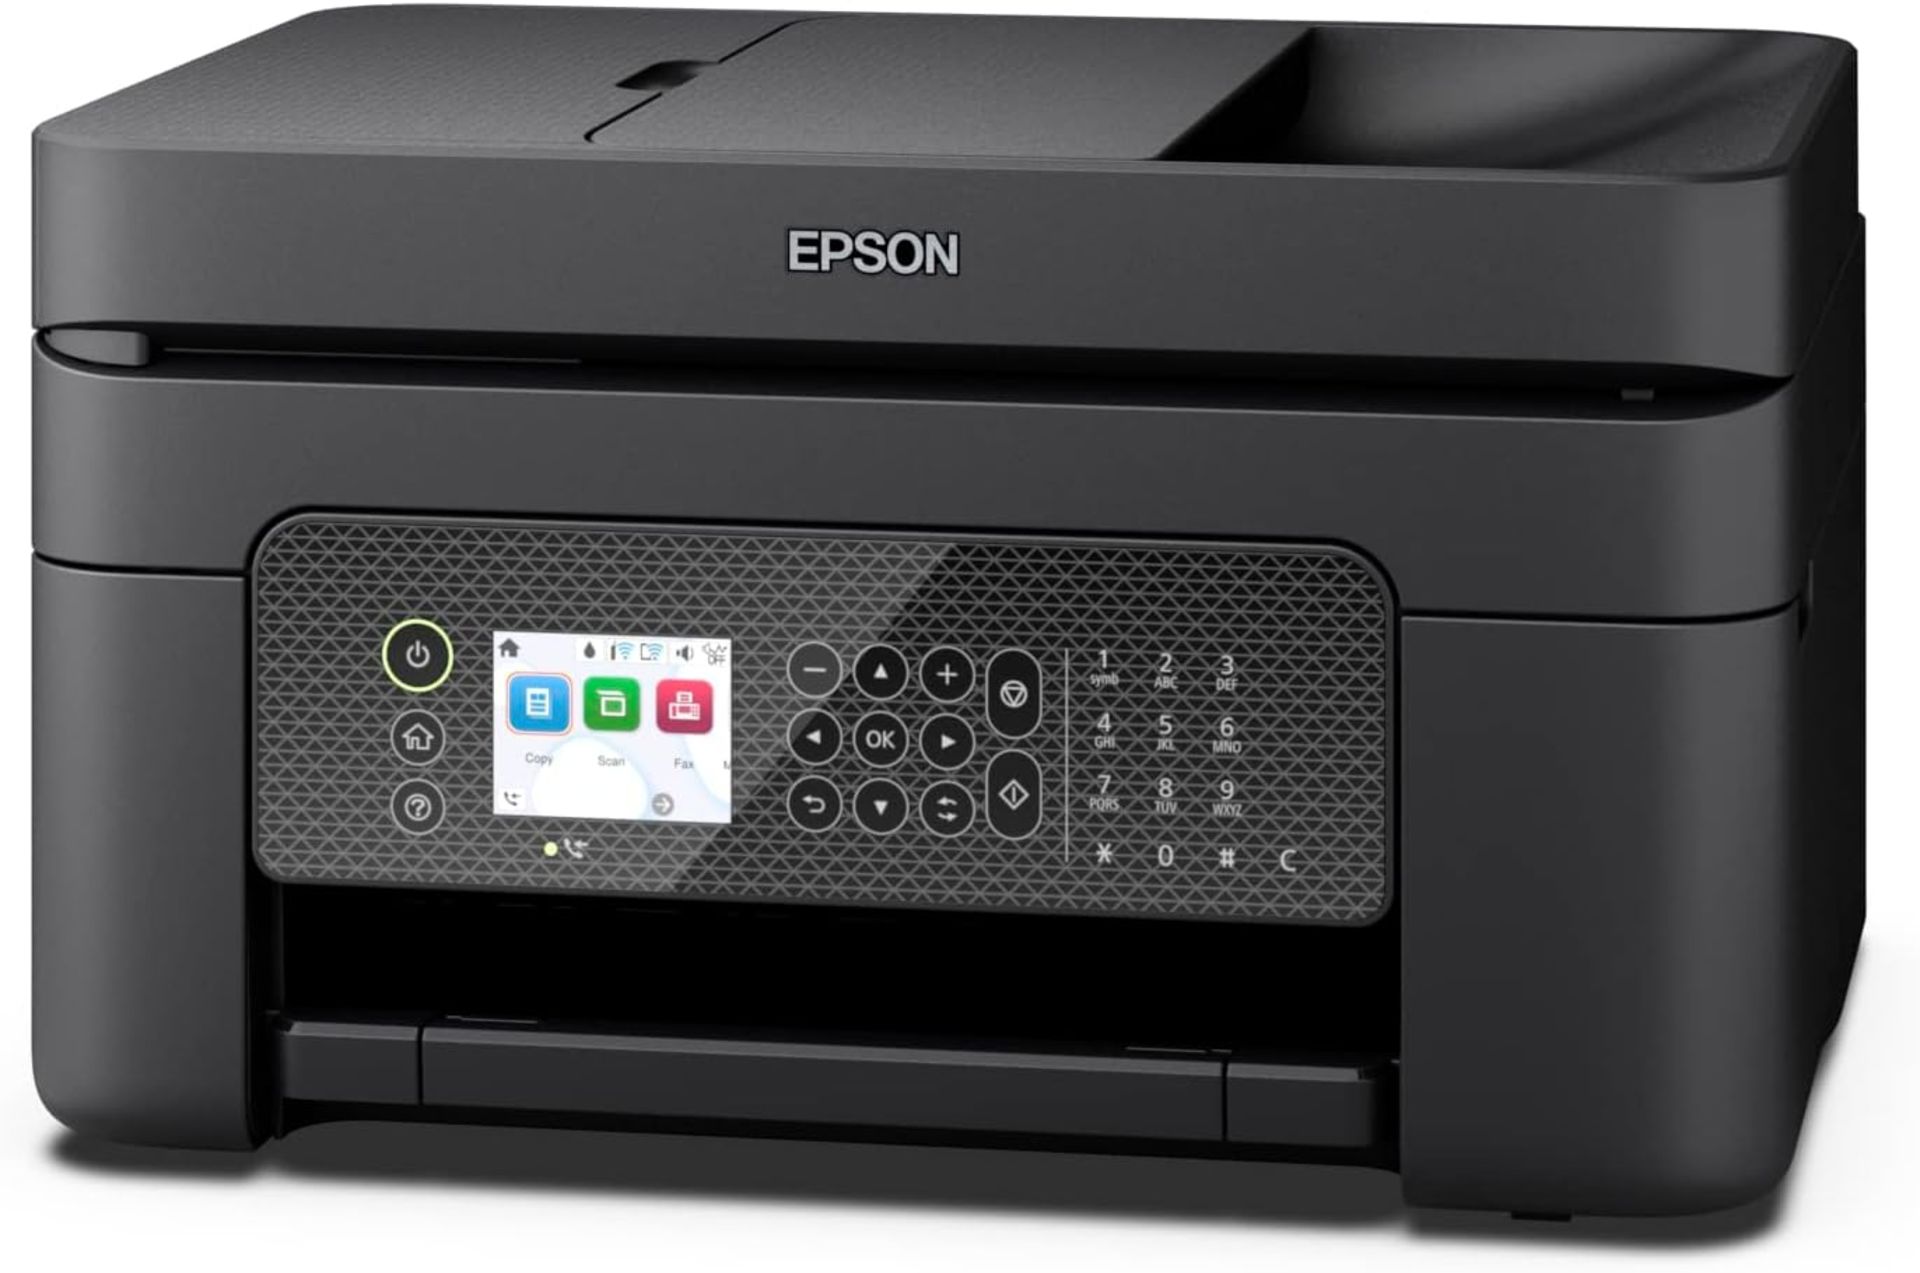 EPSON WF-2950DWF A4 Multifunction Wireless Inkjet Printer. RRP £99.99. (R6R). COMPACT AND - Image 4 of 9